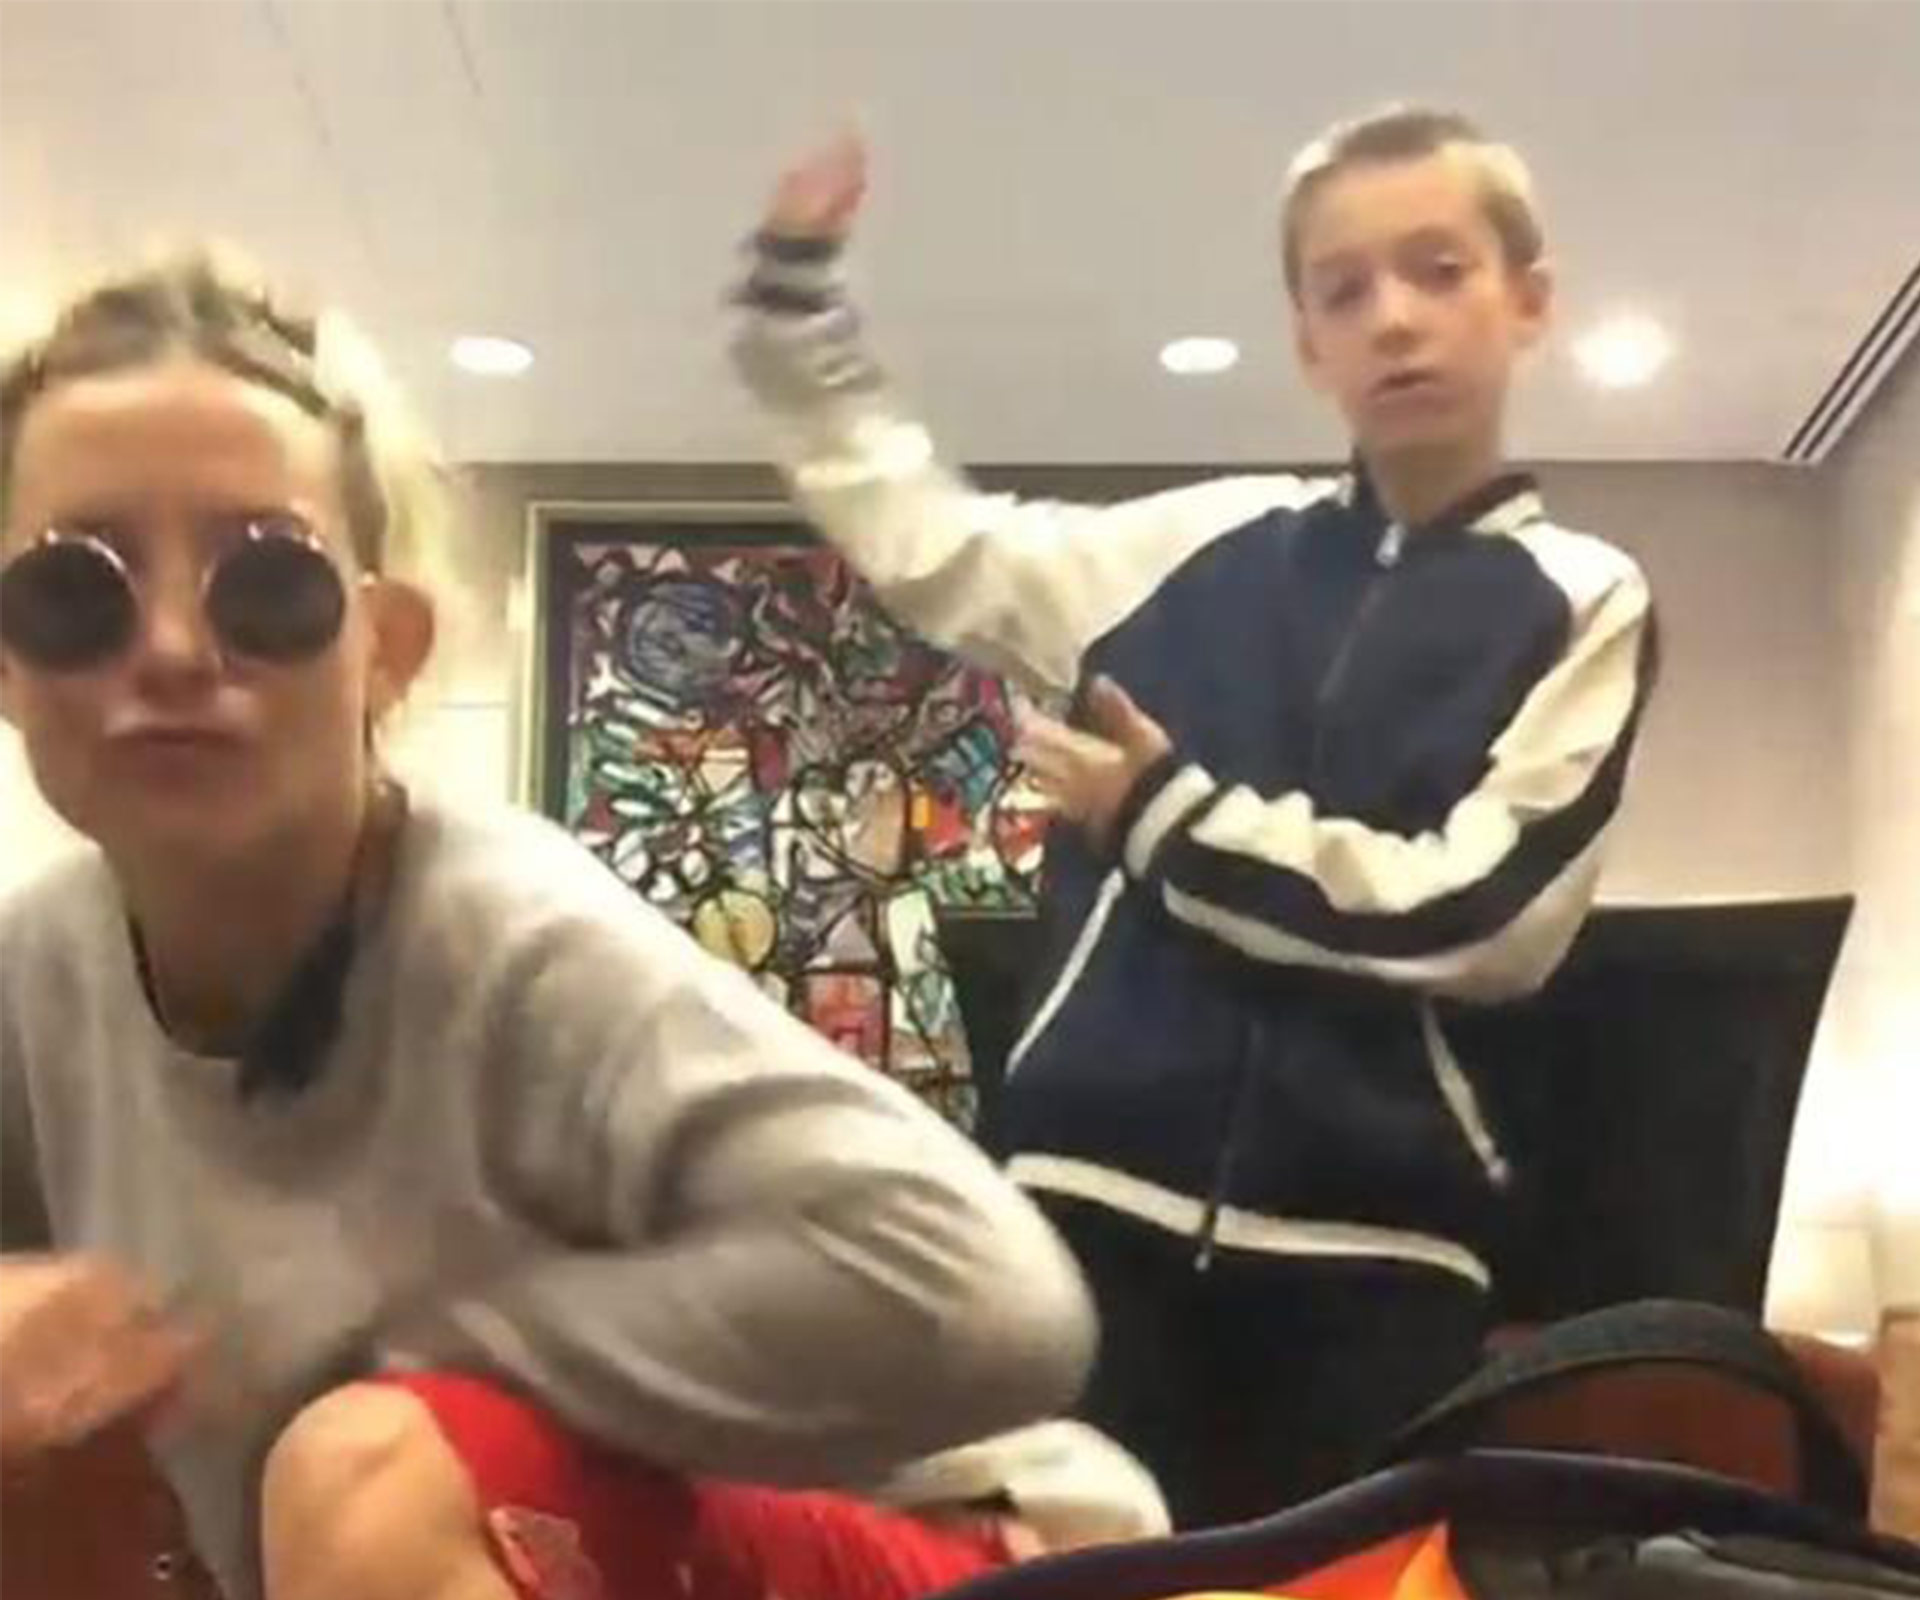 Kate Hudson and son Ryder’s hilarious “Trap Queen” dance video in an airport lounge